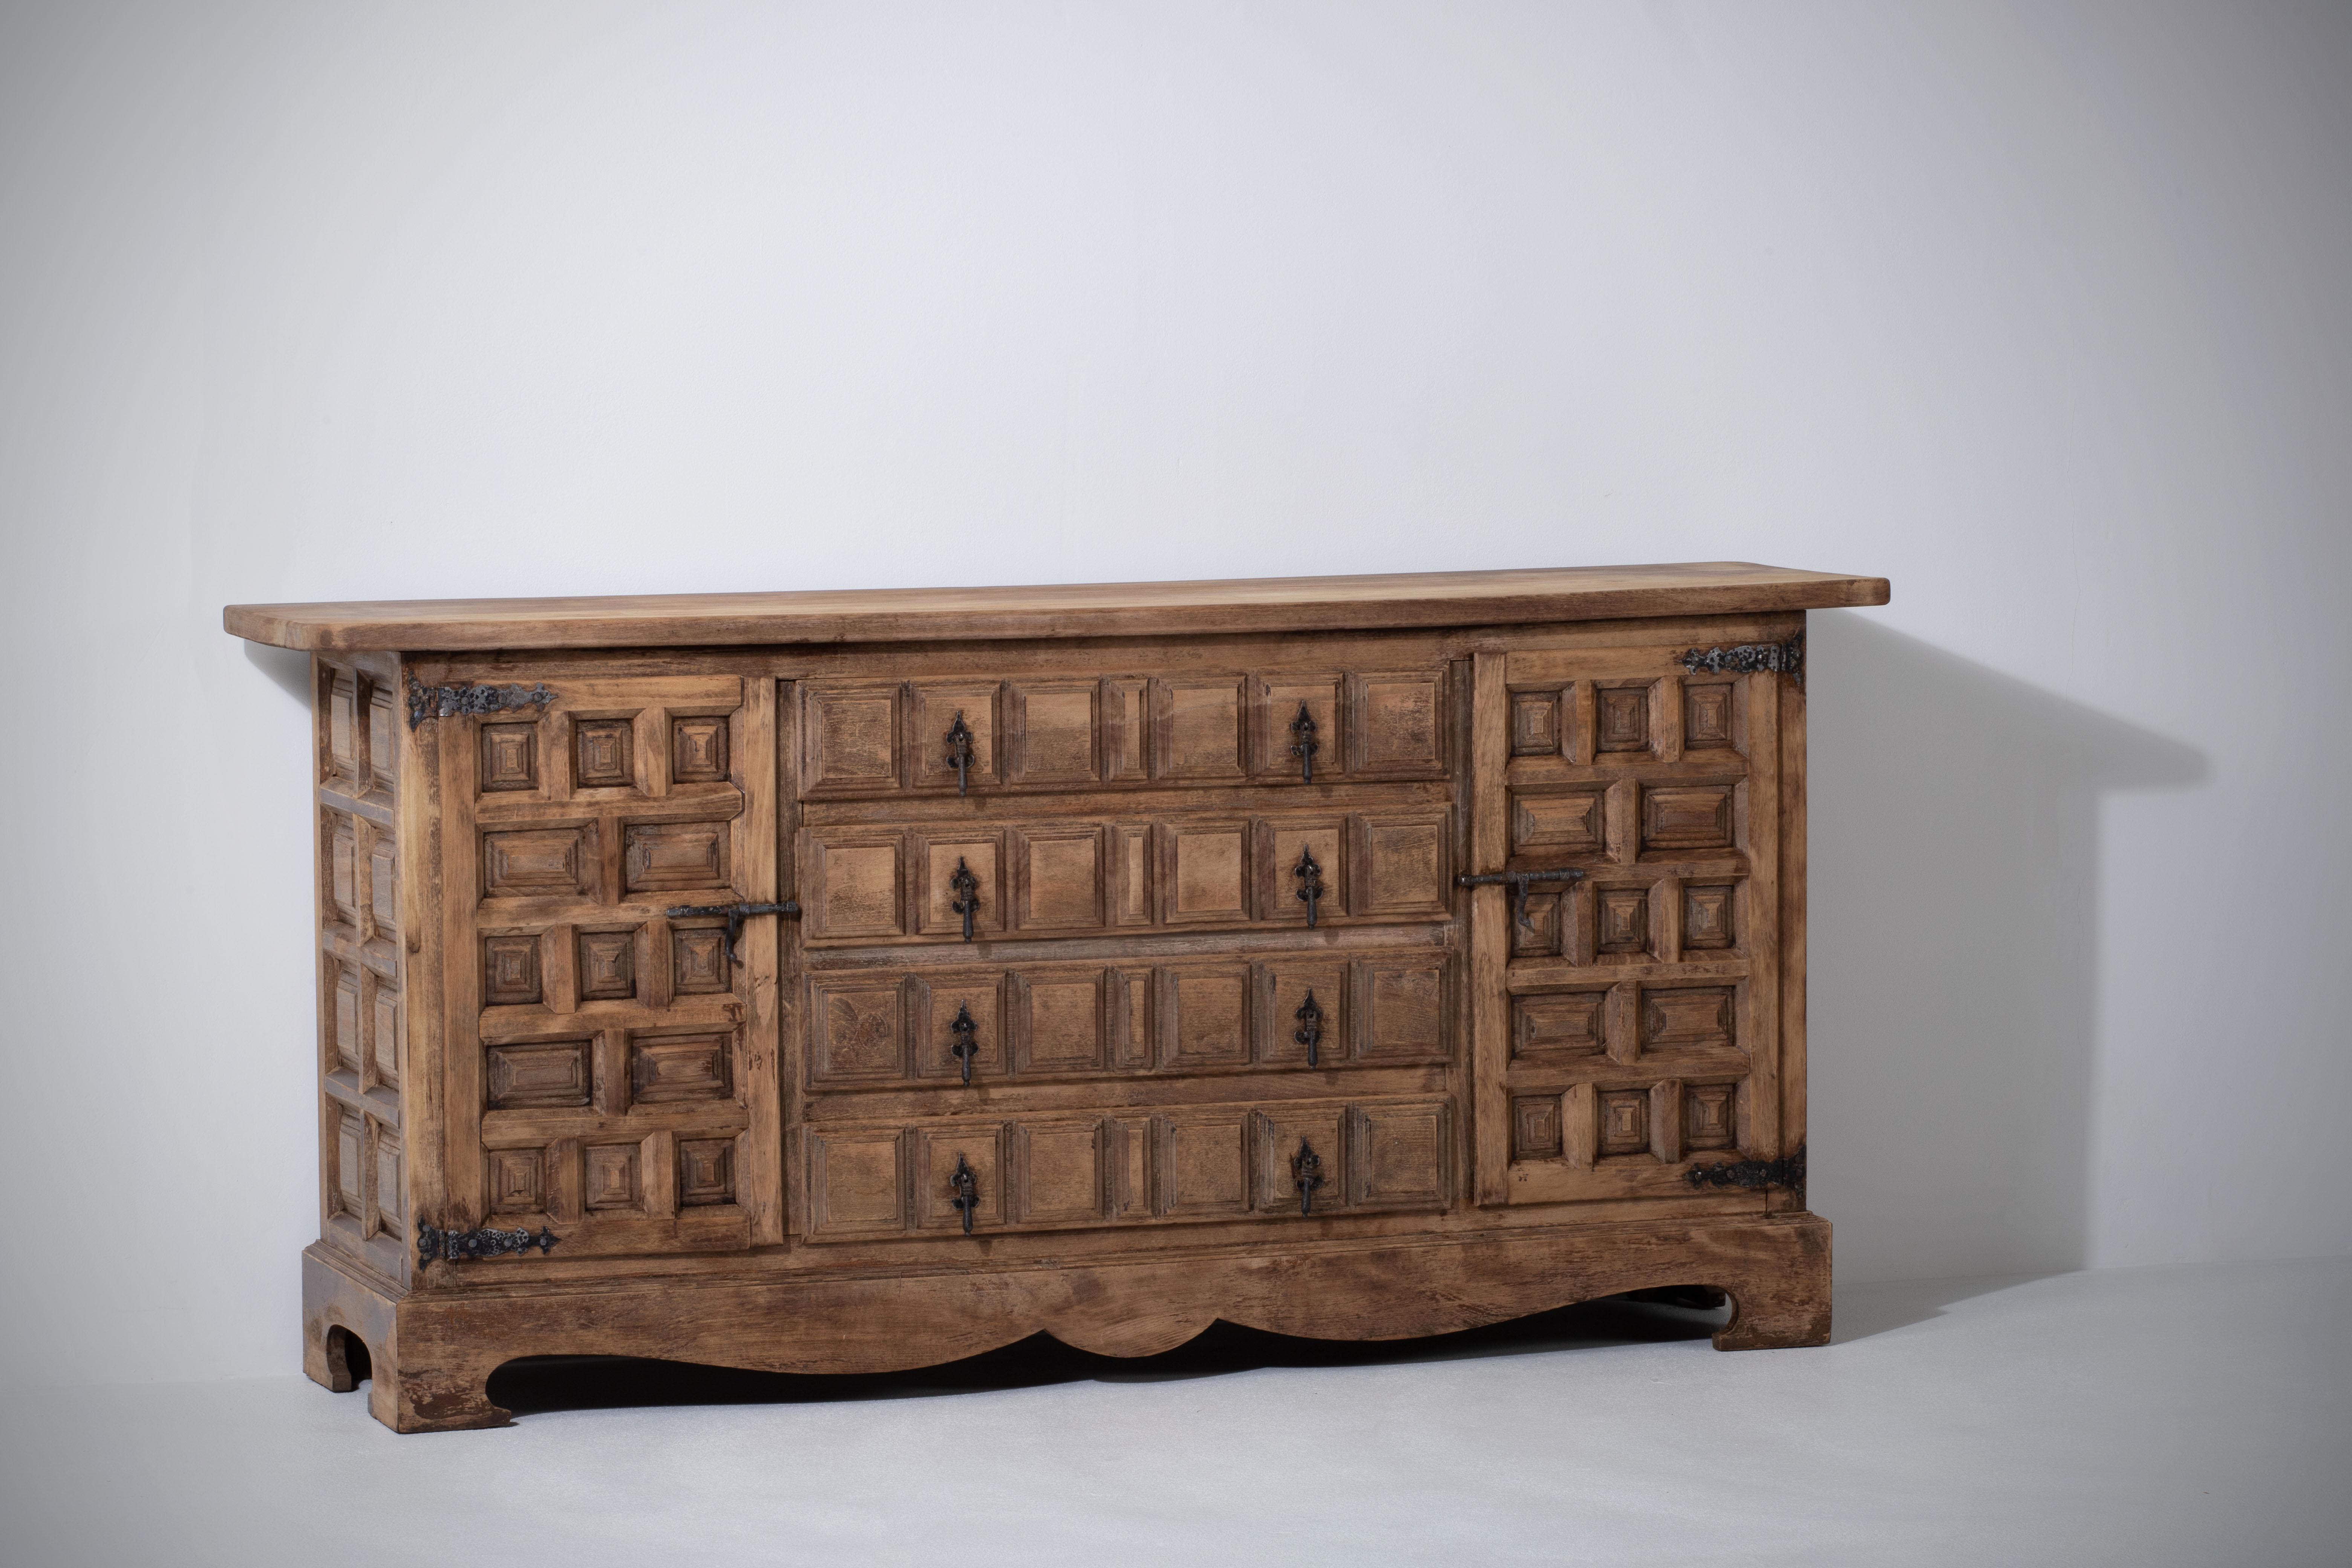 Hand-Carved Catalan Spanish Baroque Carved Walnut Tuscan Credenza or Buffet